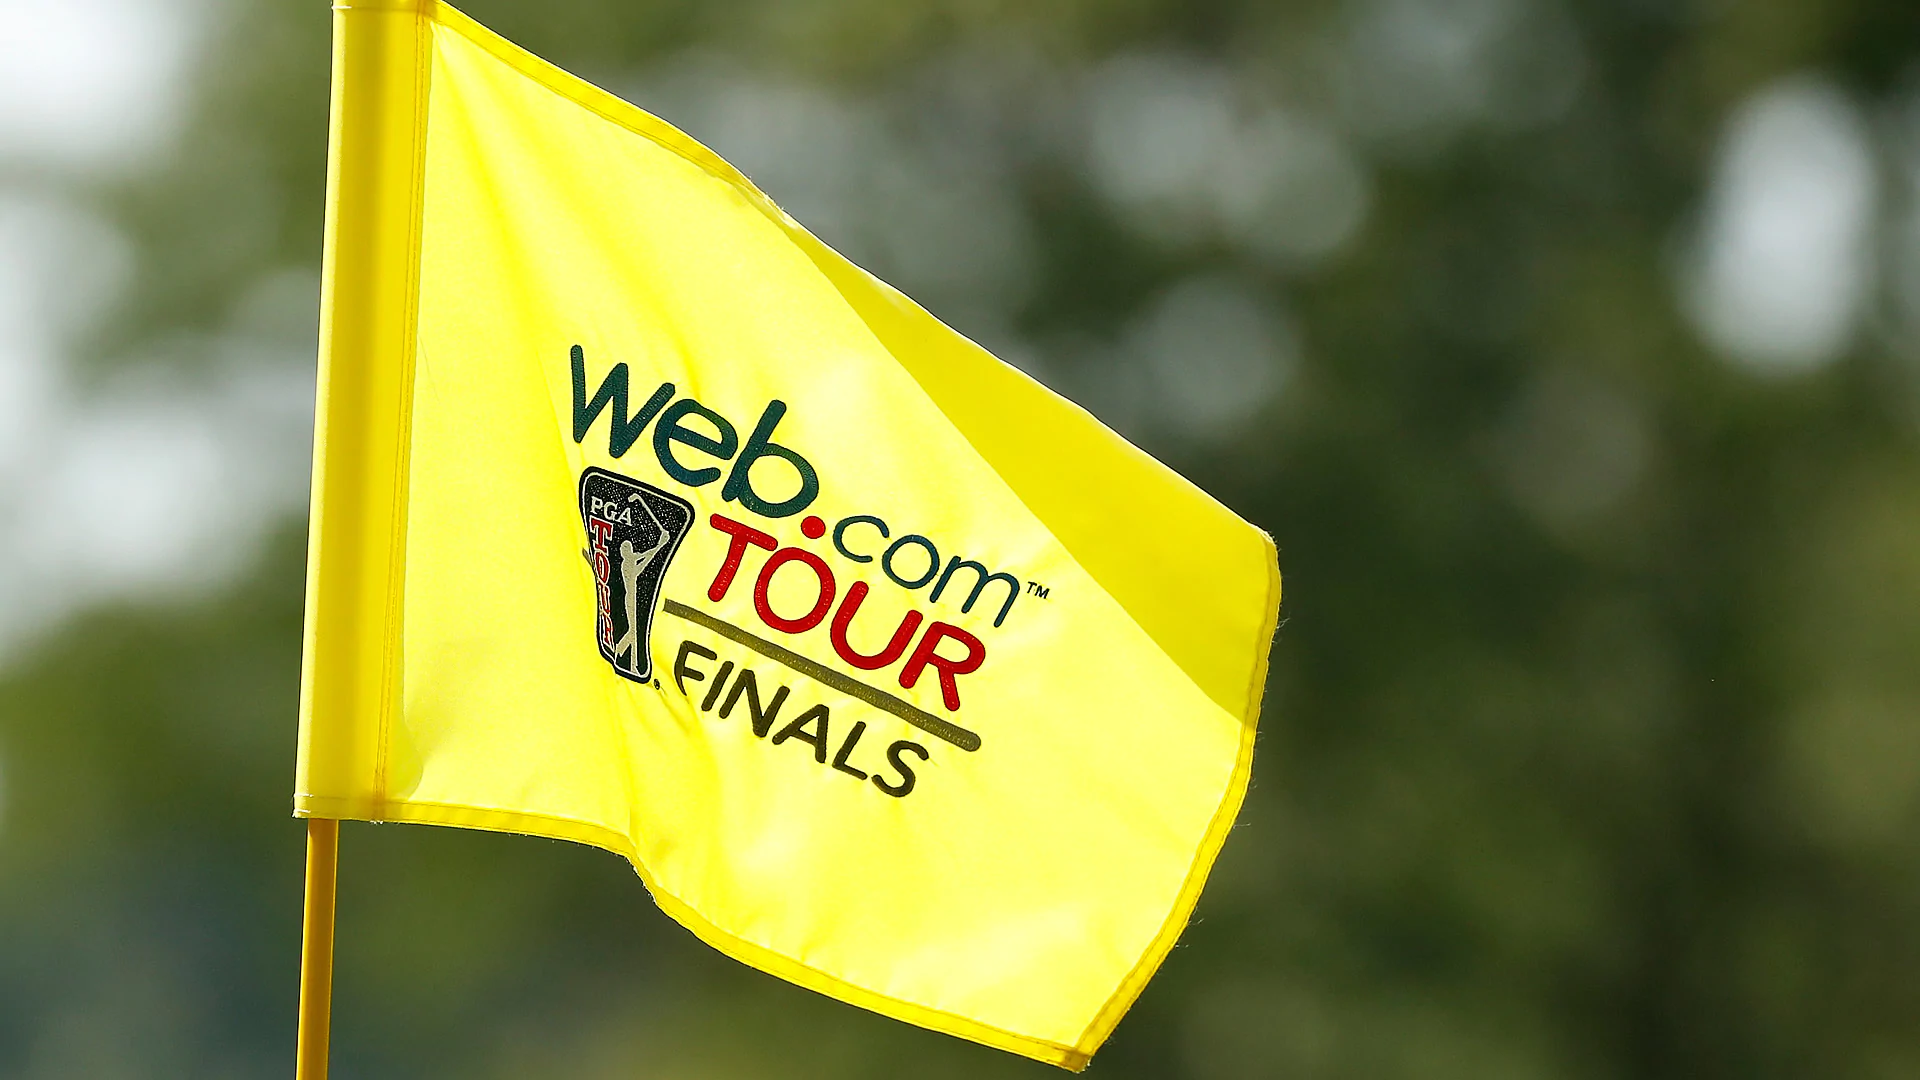 Free admission for first responders at Web Tour Champ.